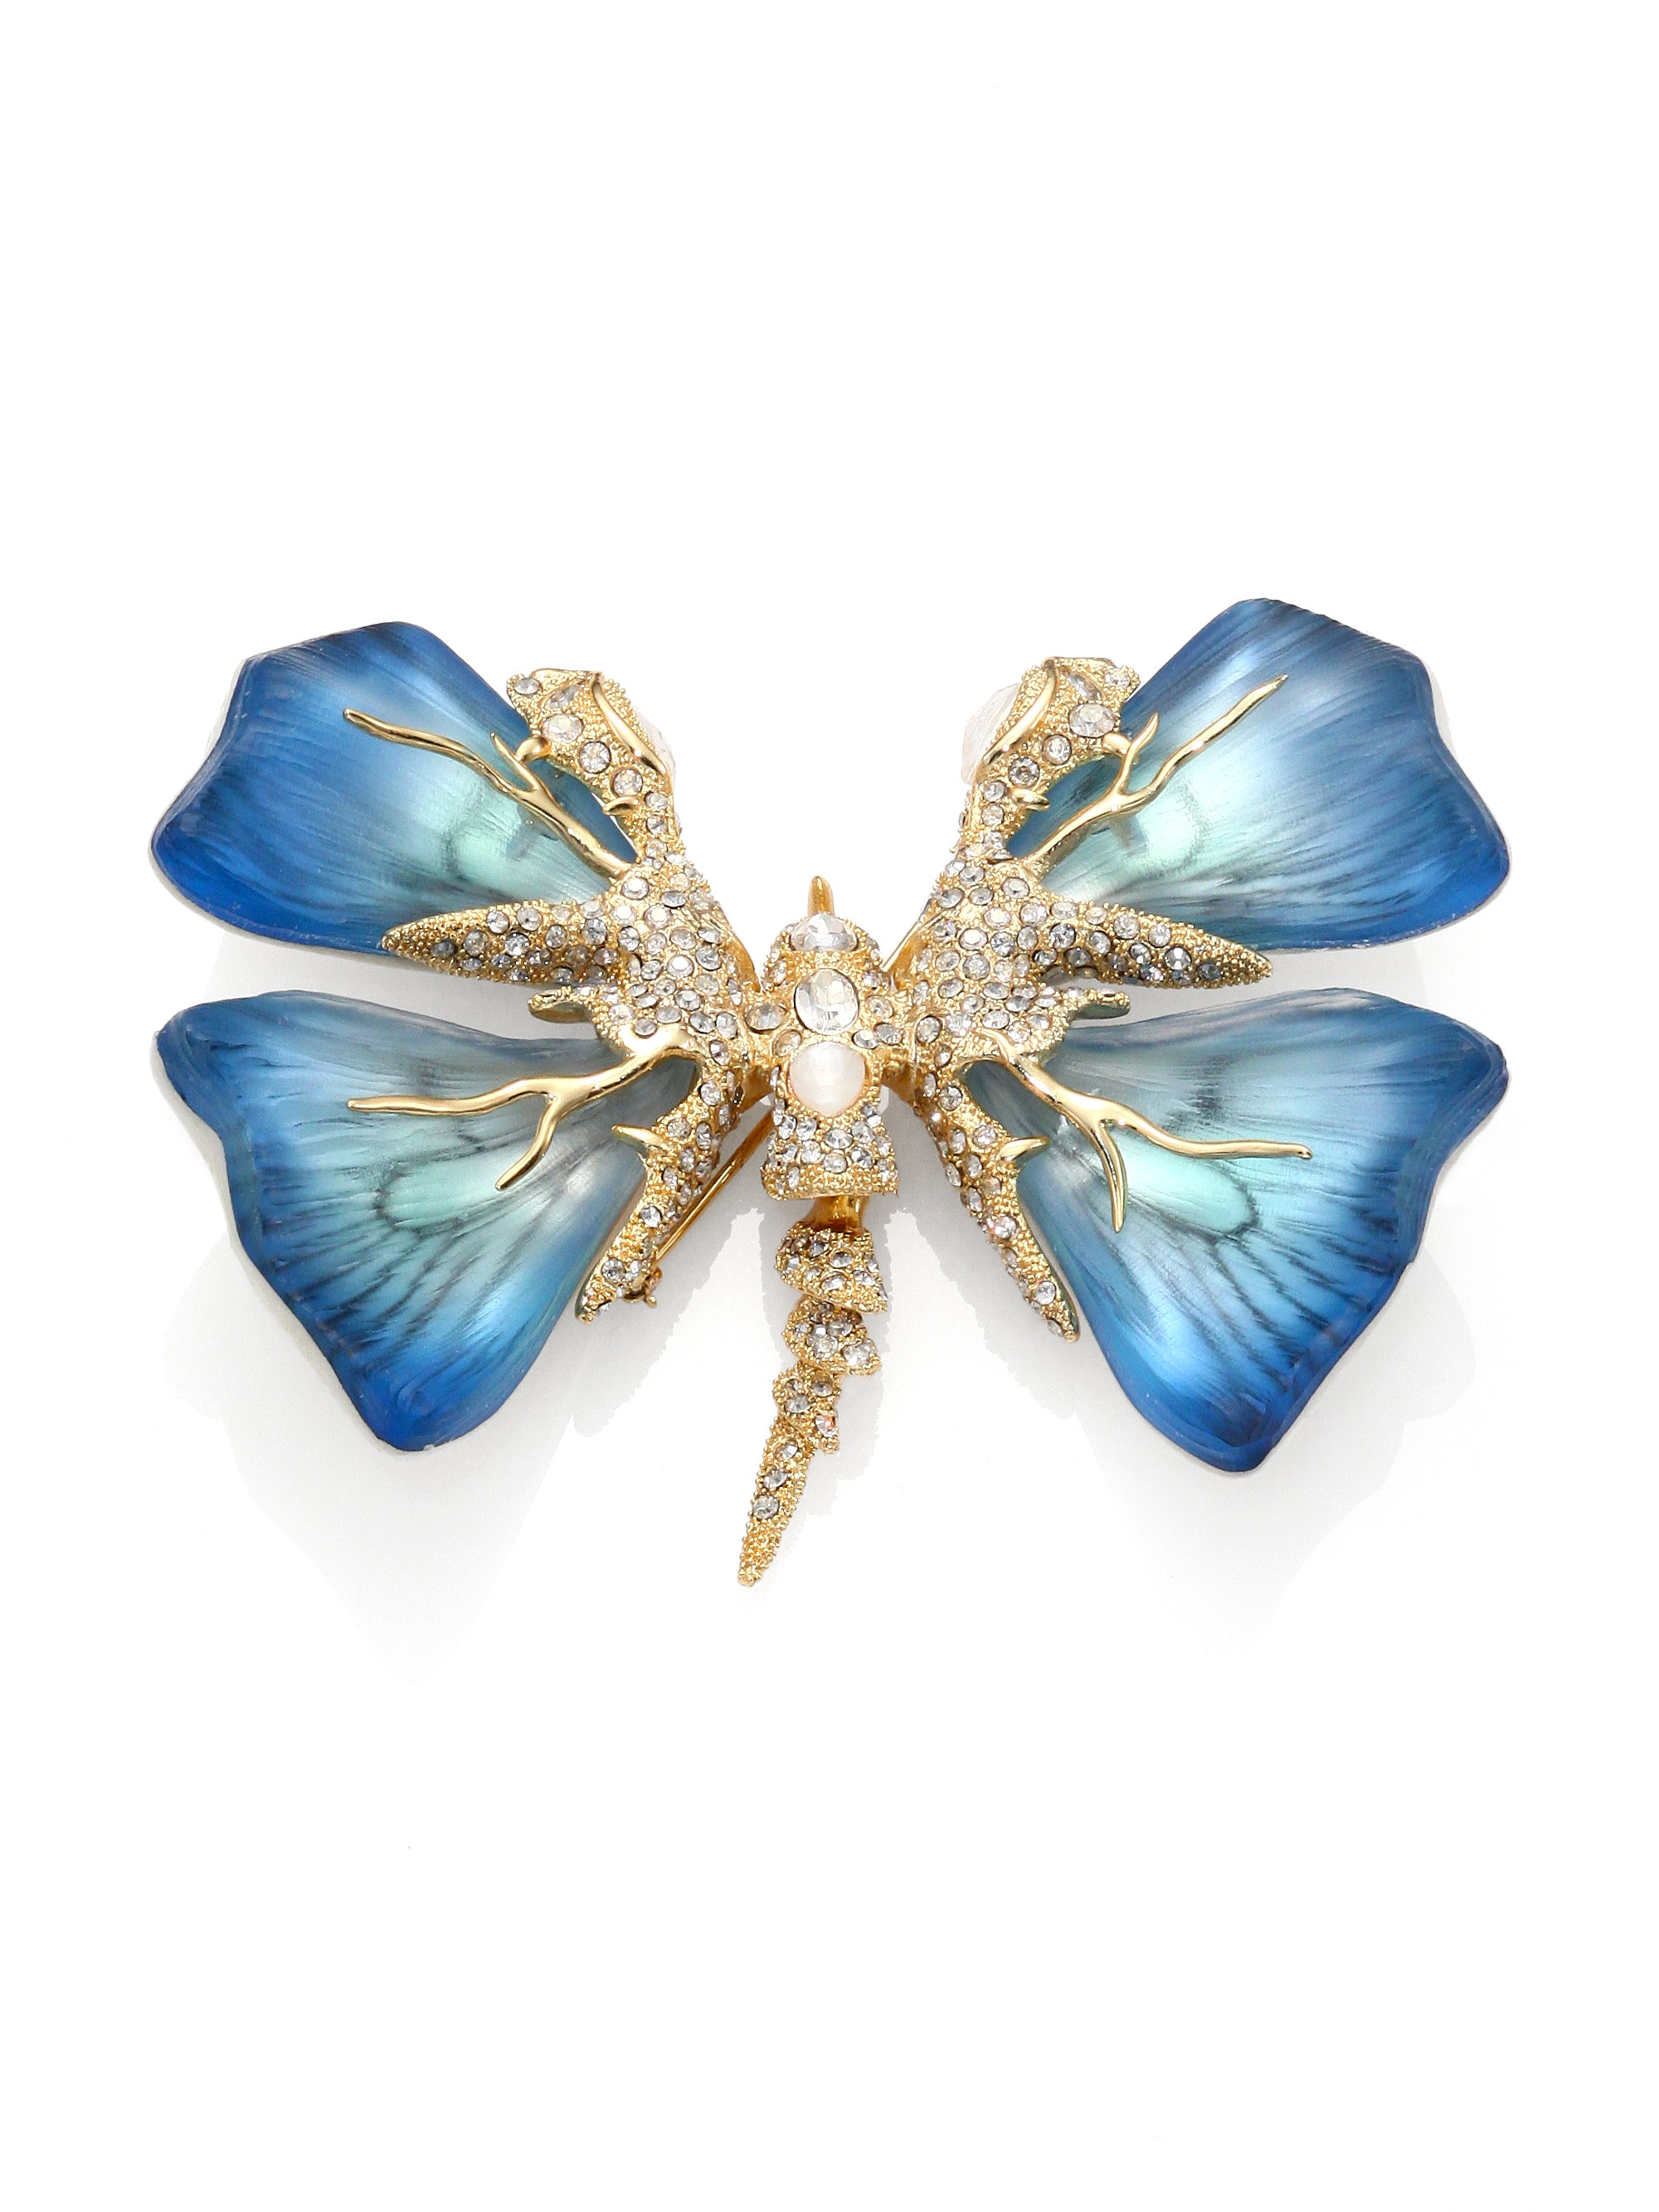 Alexis bittar Lucite Motherofpearl Doublet Crystal Butterfly Pin in ...